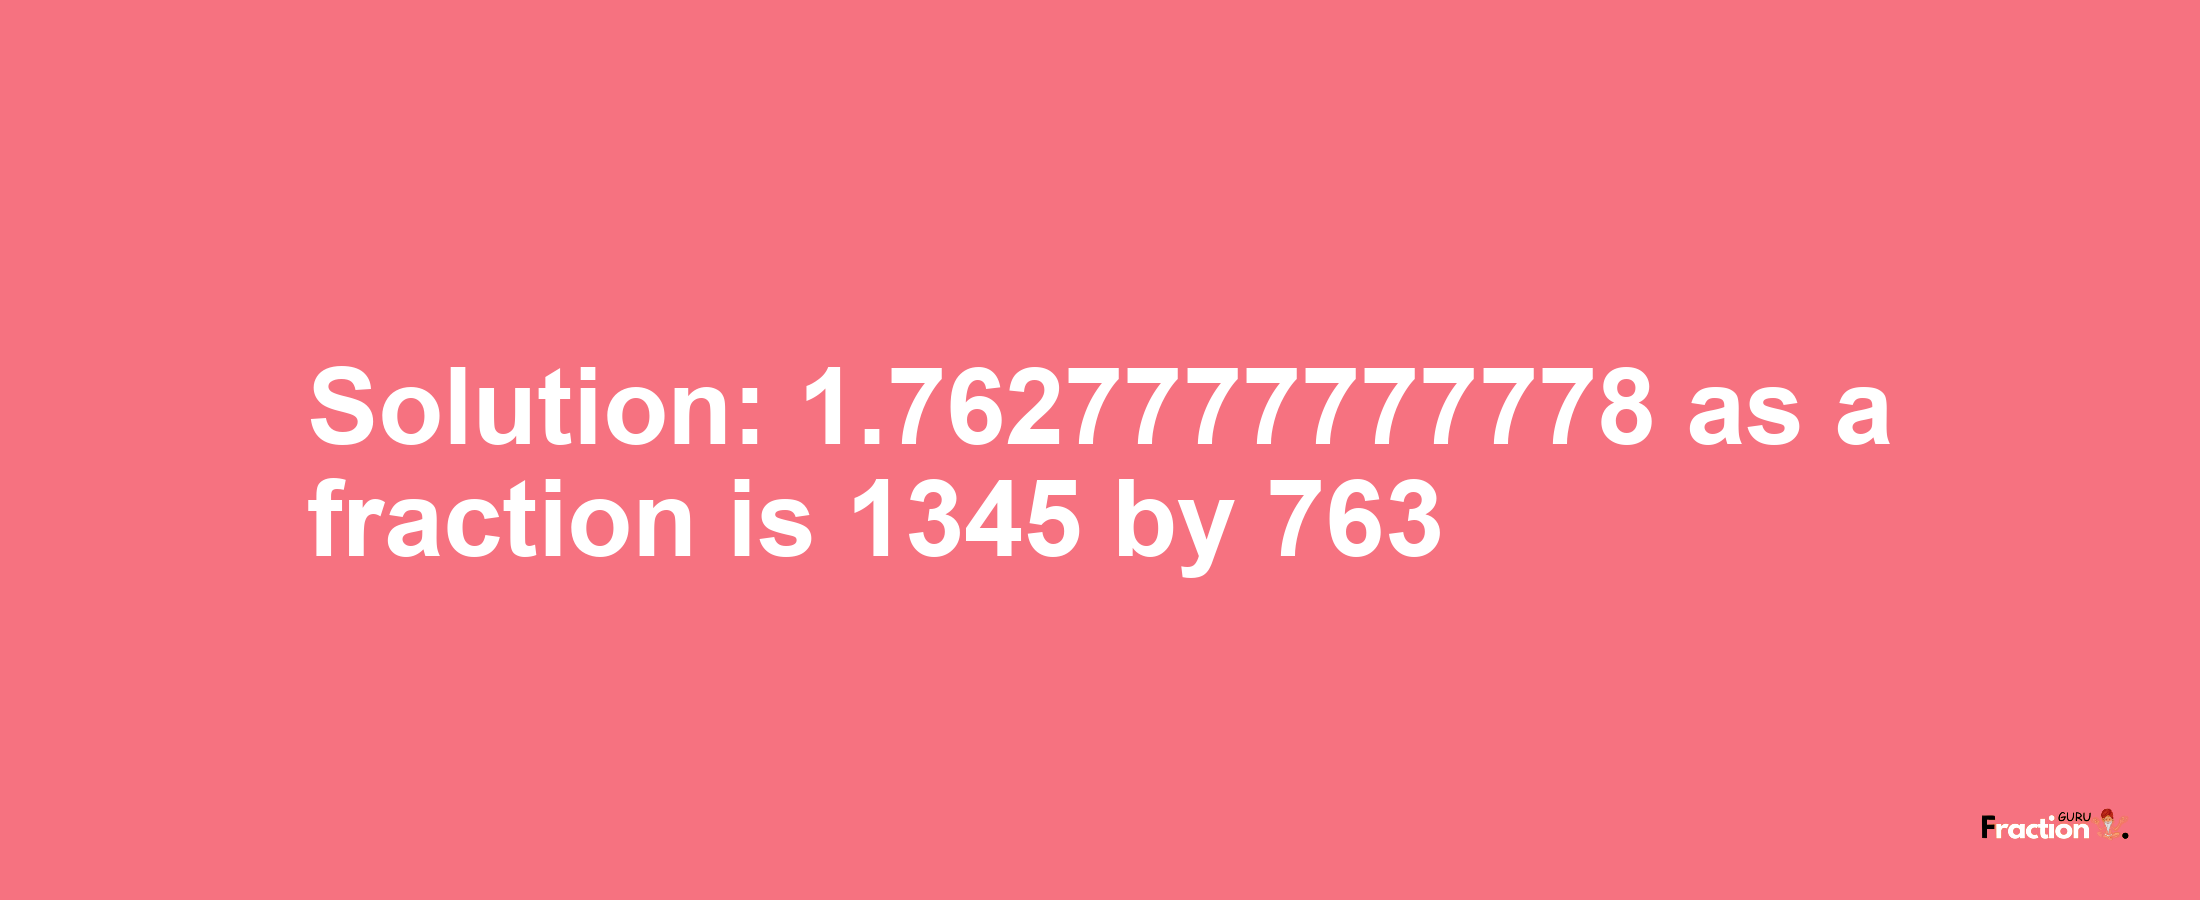 Solution:1.7627777777778 as a fraction is 1345/763